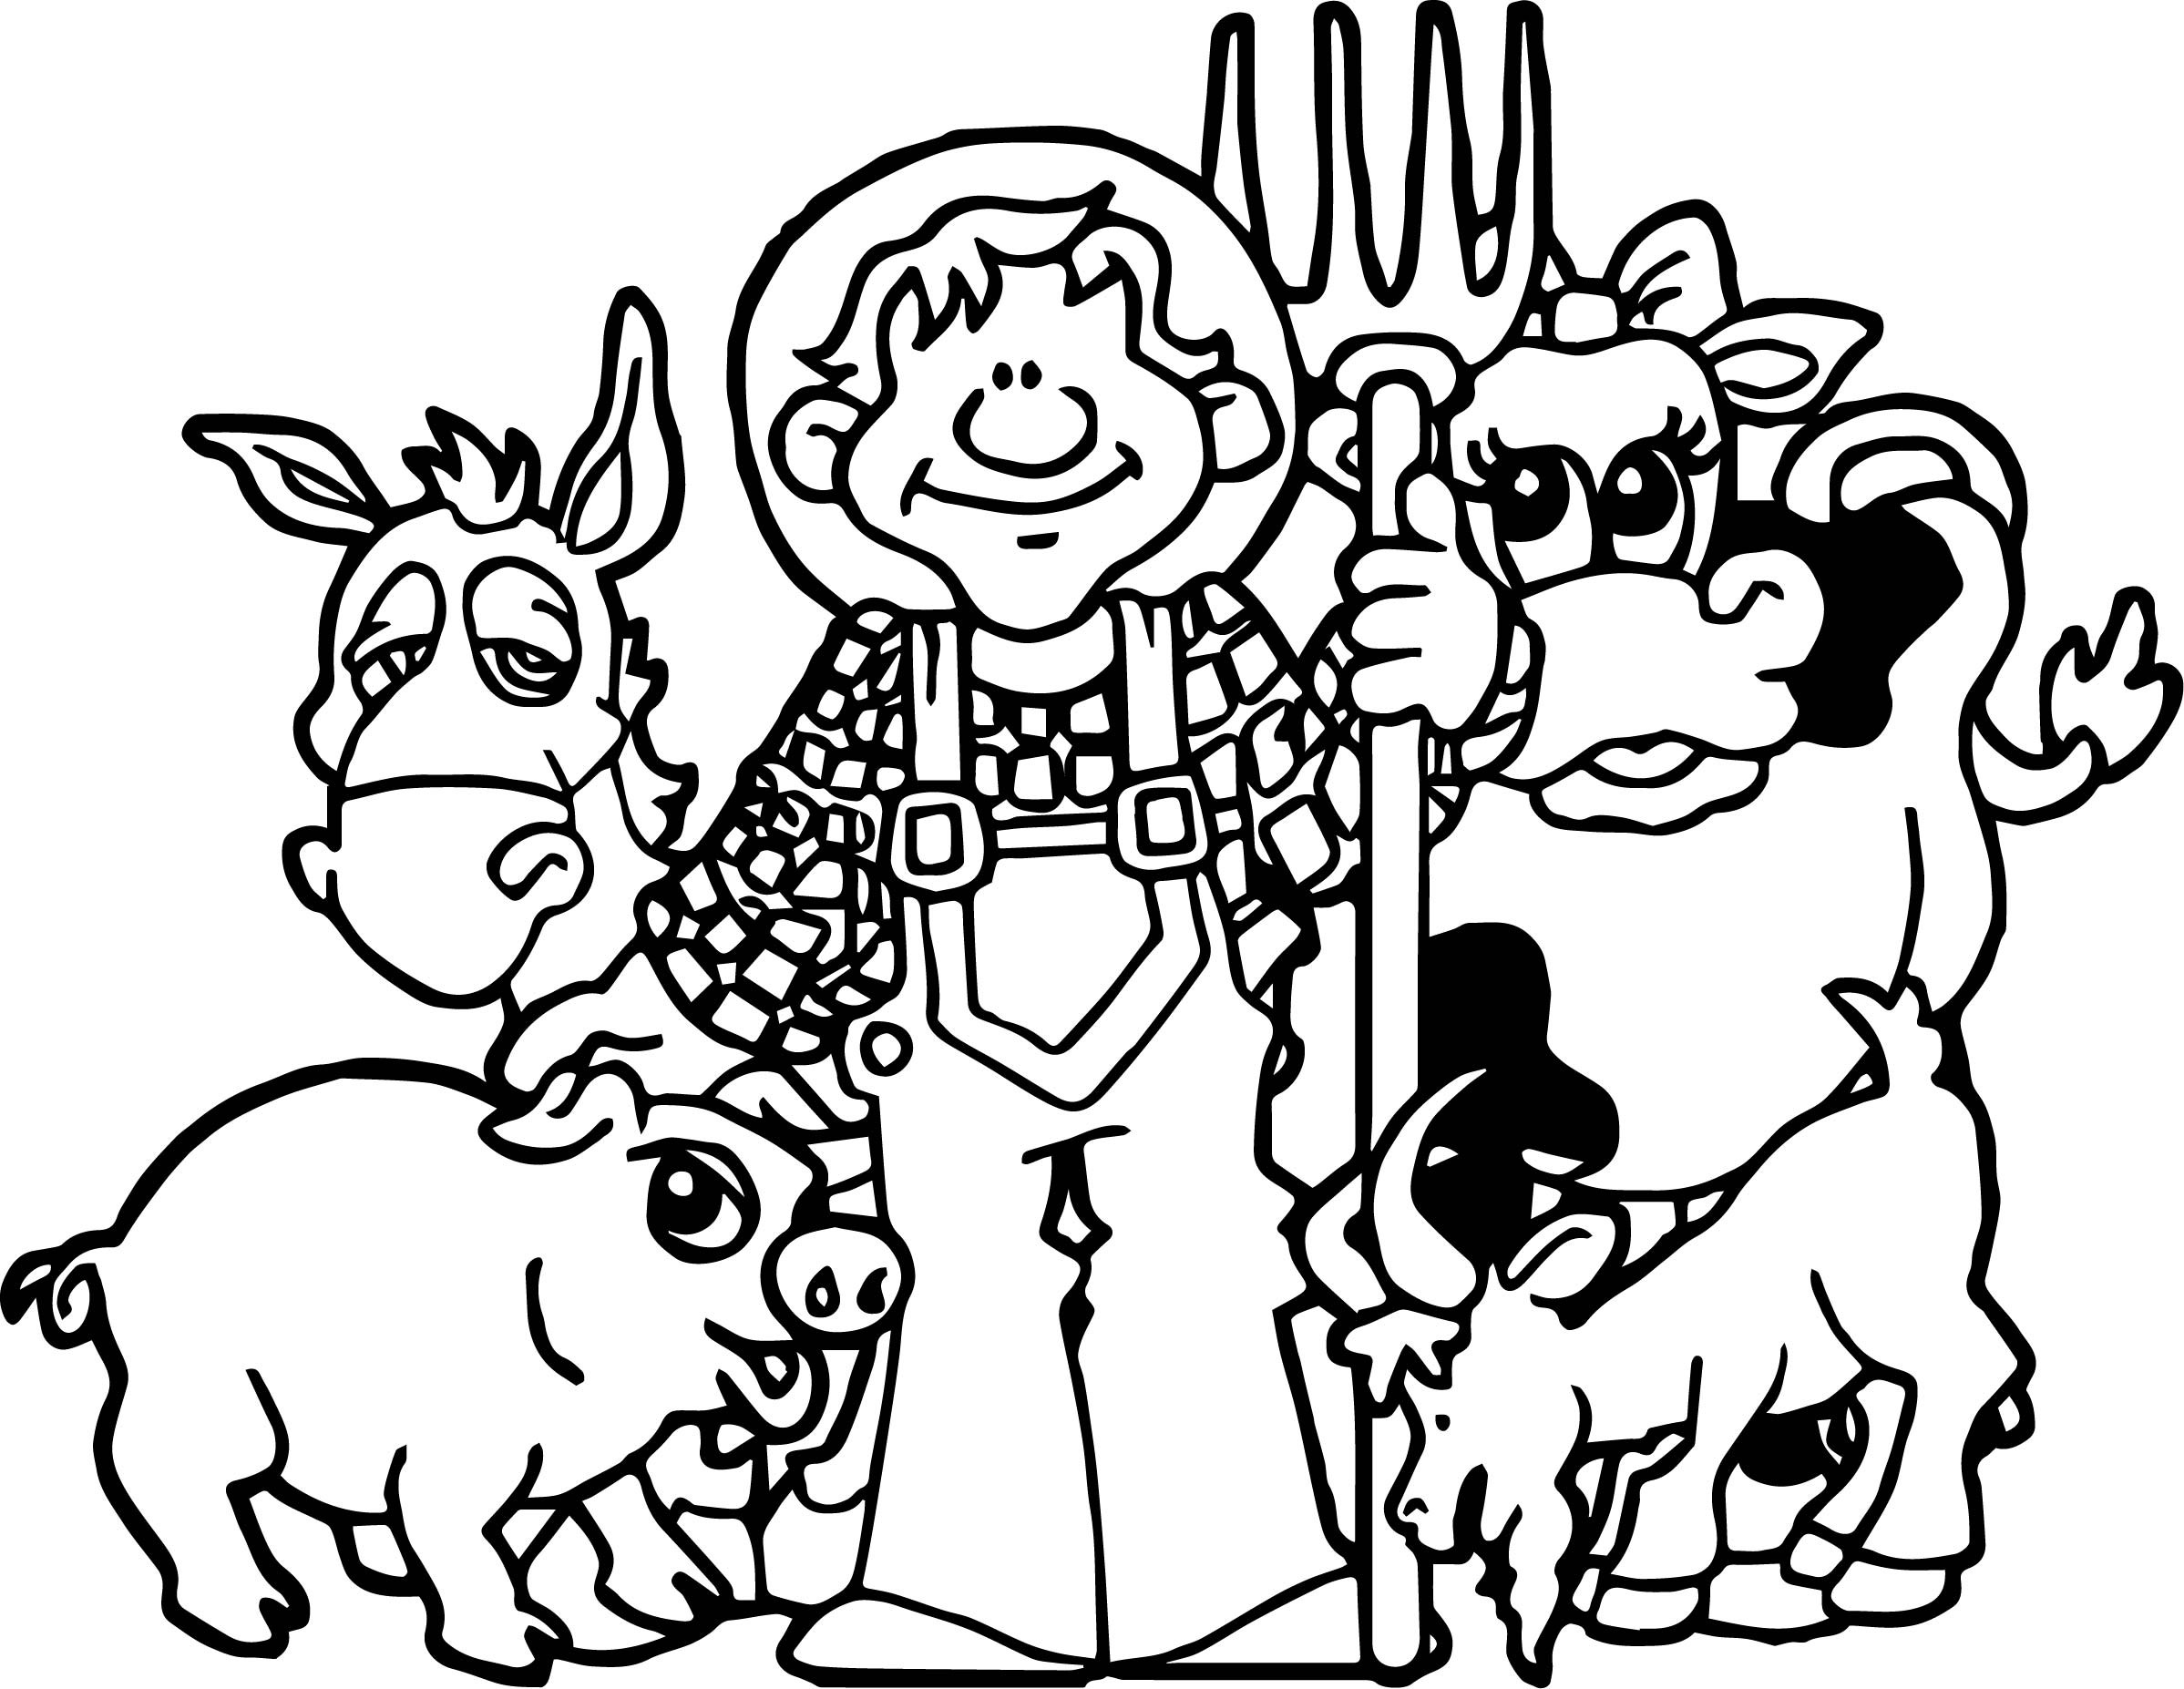 Baby Farm Animal Coloring Pages
 Baby Farm Animal Family Coloring Page